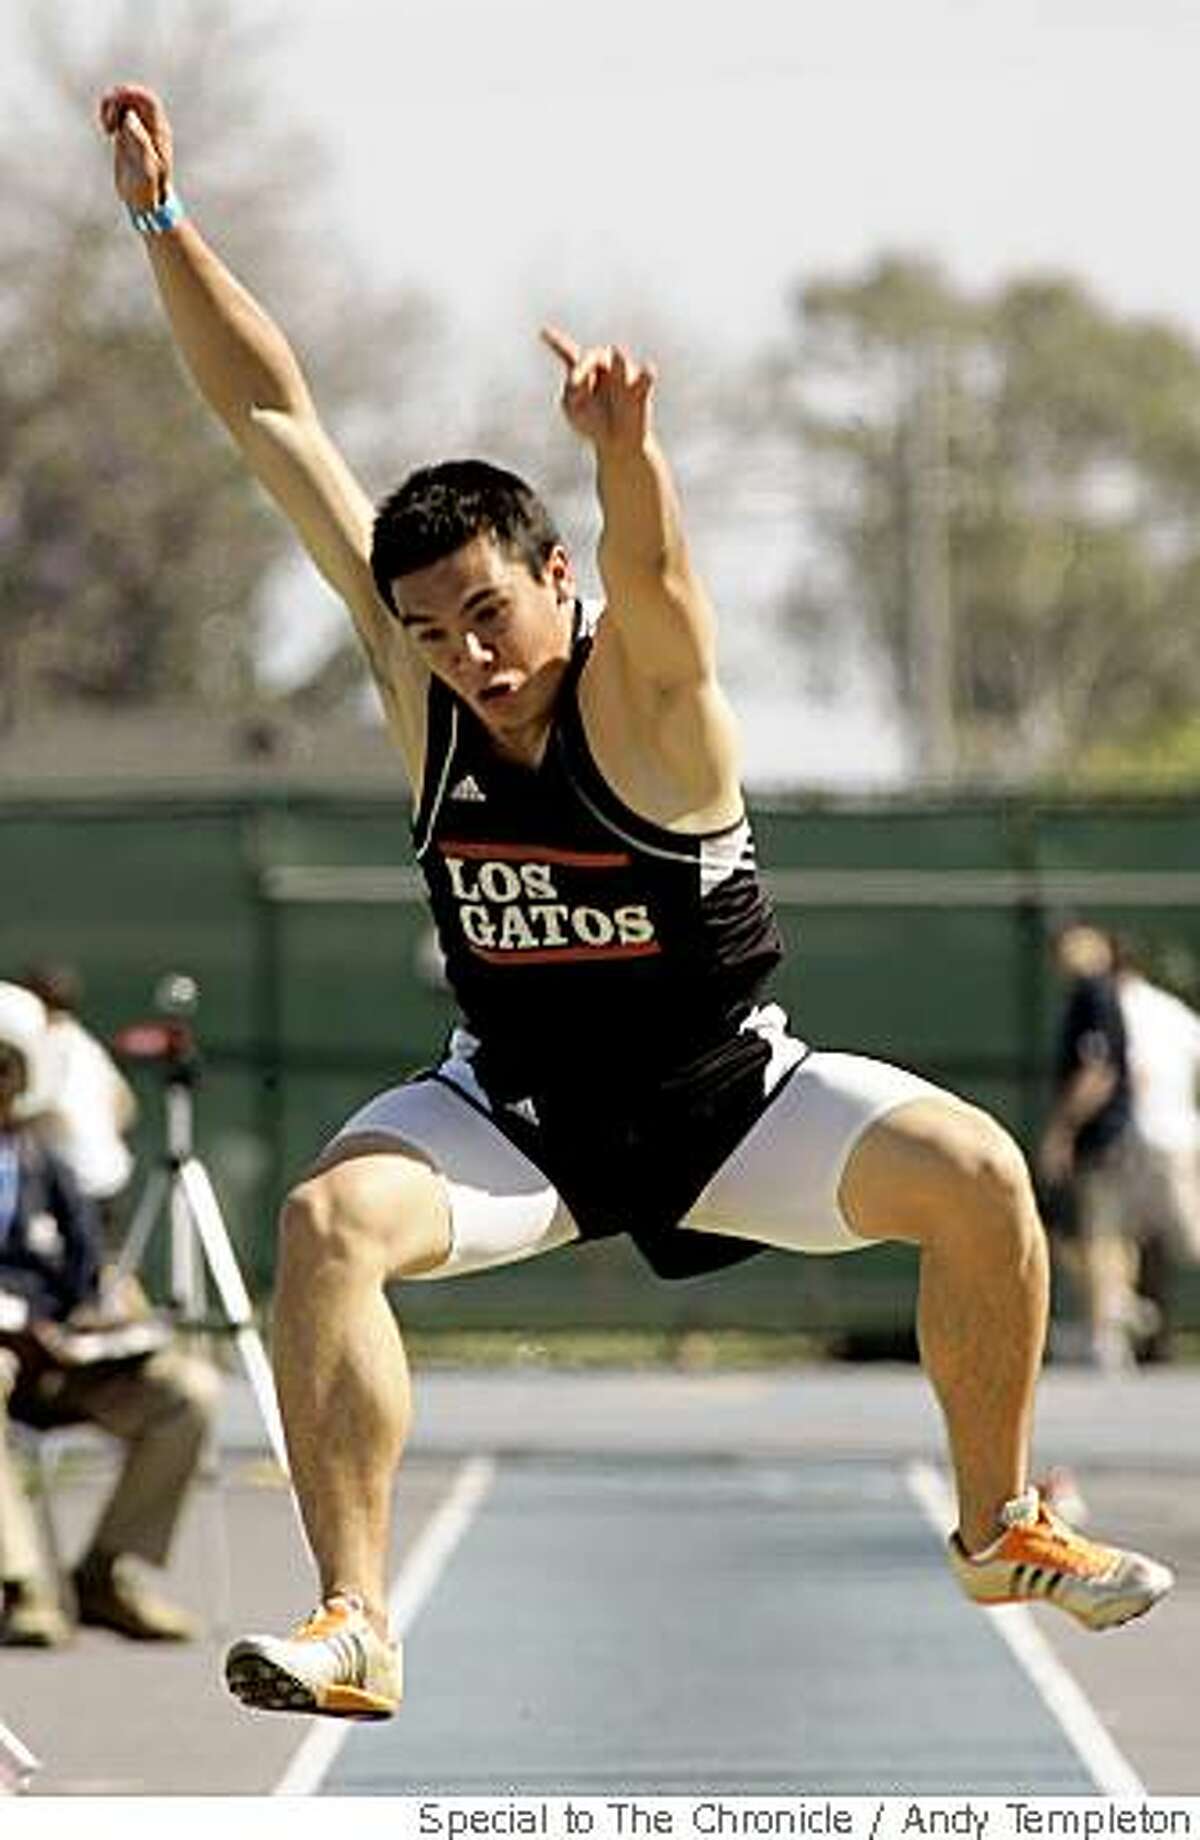 Kevin Rutledge of Los Gatos placed 2nd in the Boys Long Jump at the CIF Track and Field Championships Saturday in Norwalk.